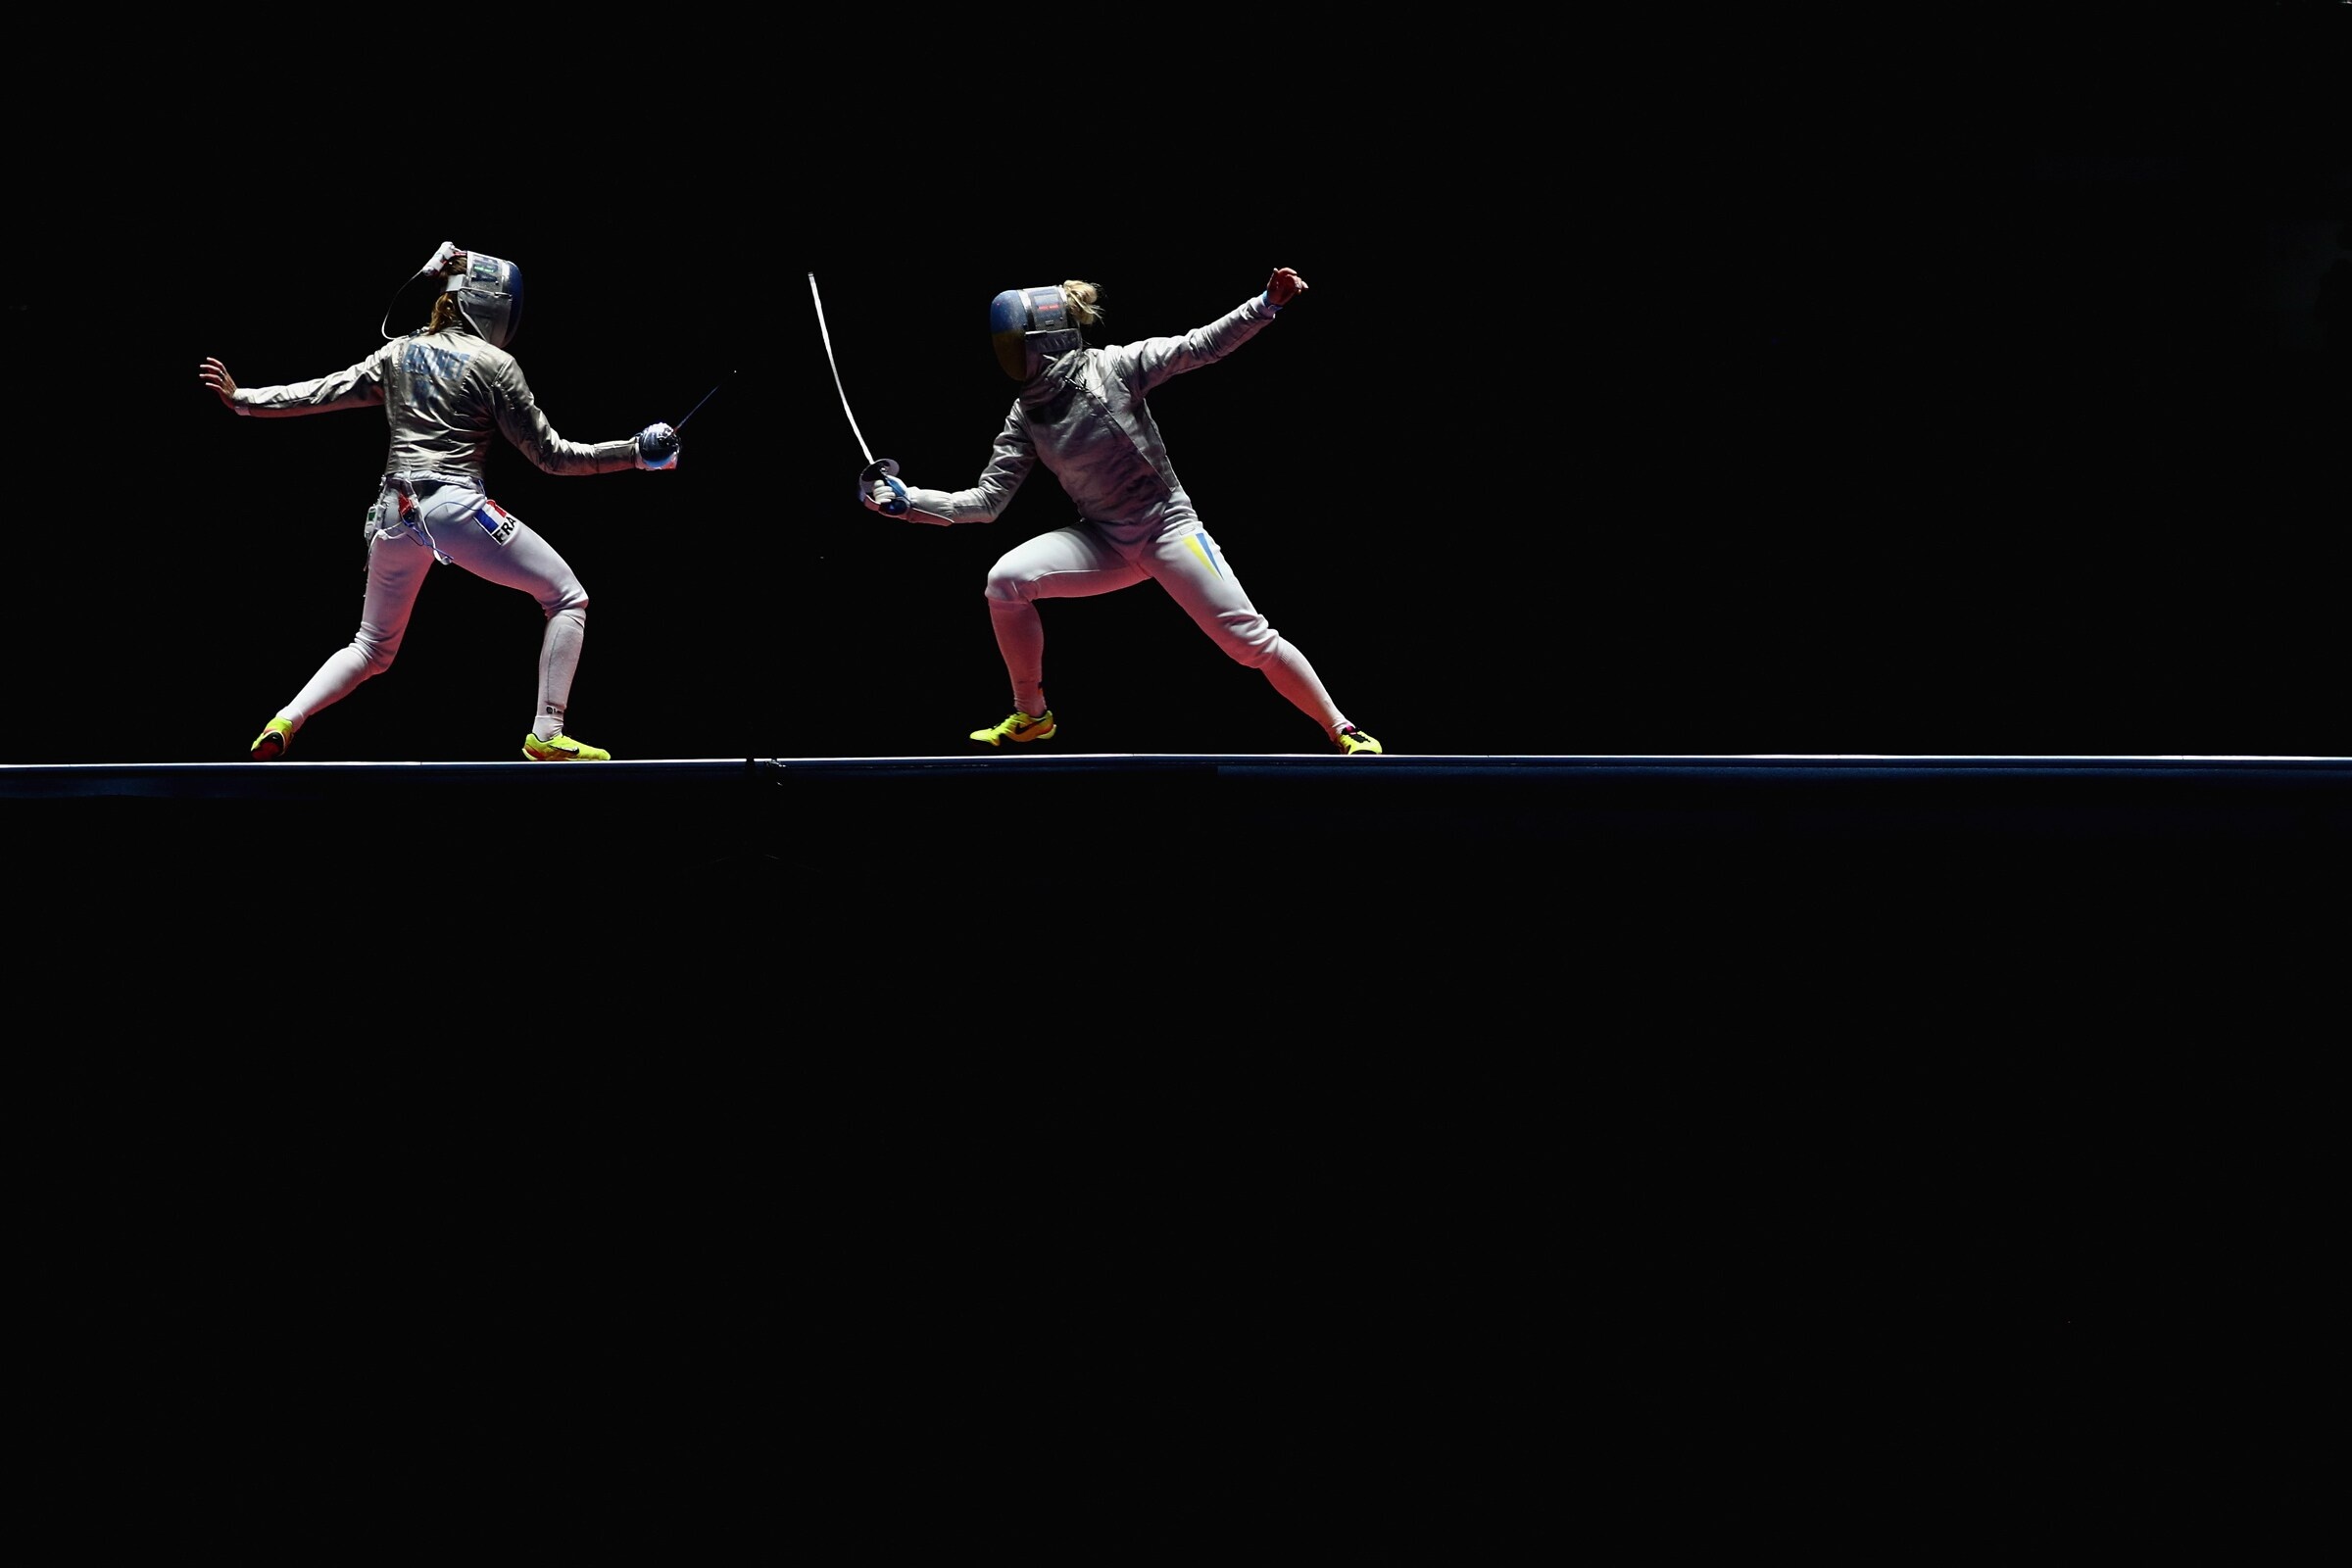 Fencing: A saber duel performed by professional fencers, One of the three combat sports disciplines. 2400x1600 HD Wallpaper.